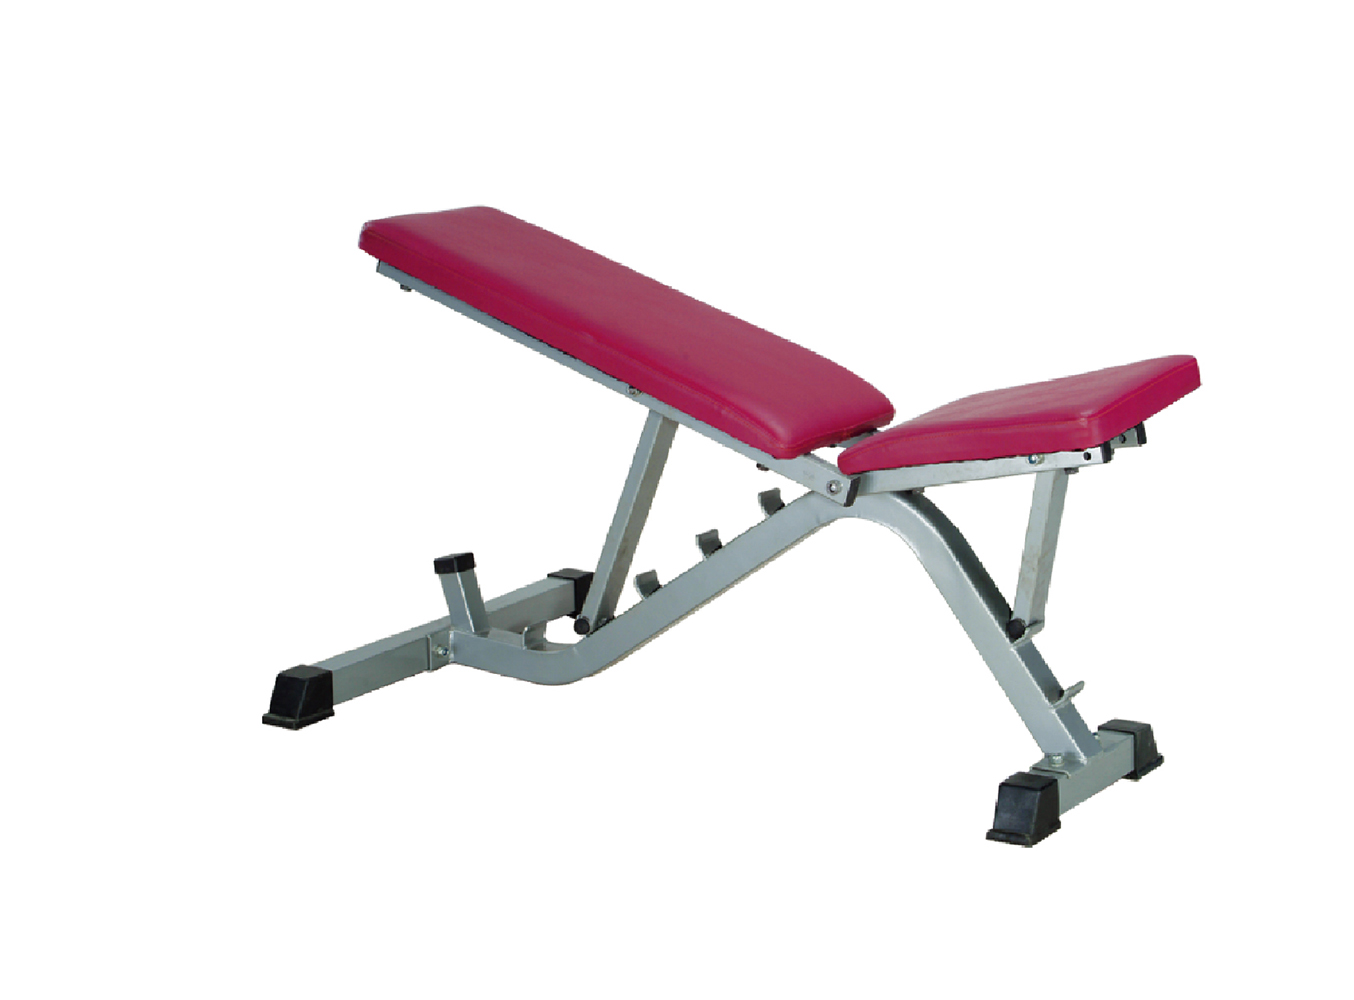 IRSB35A multifunctional stool